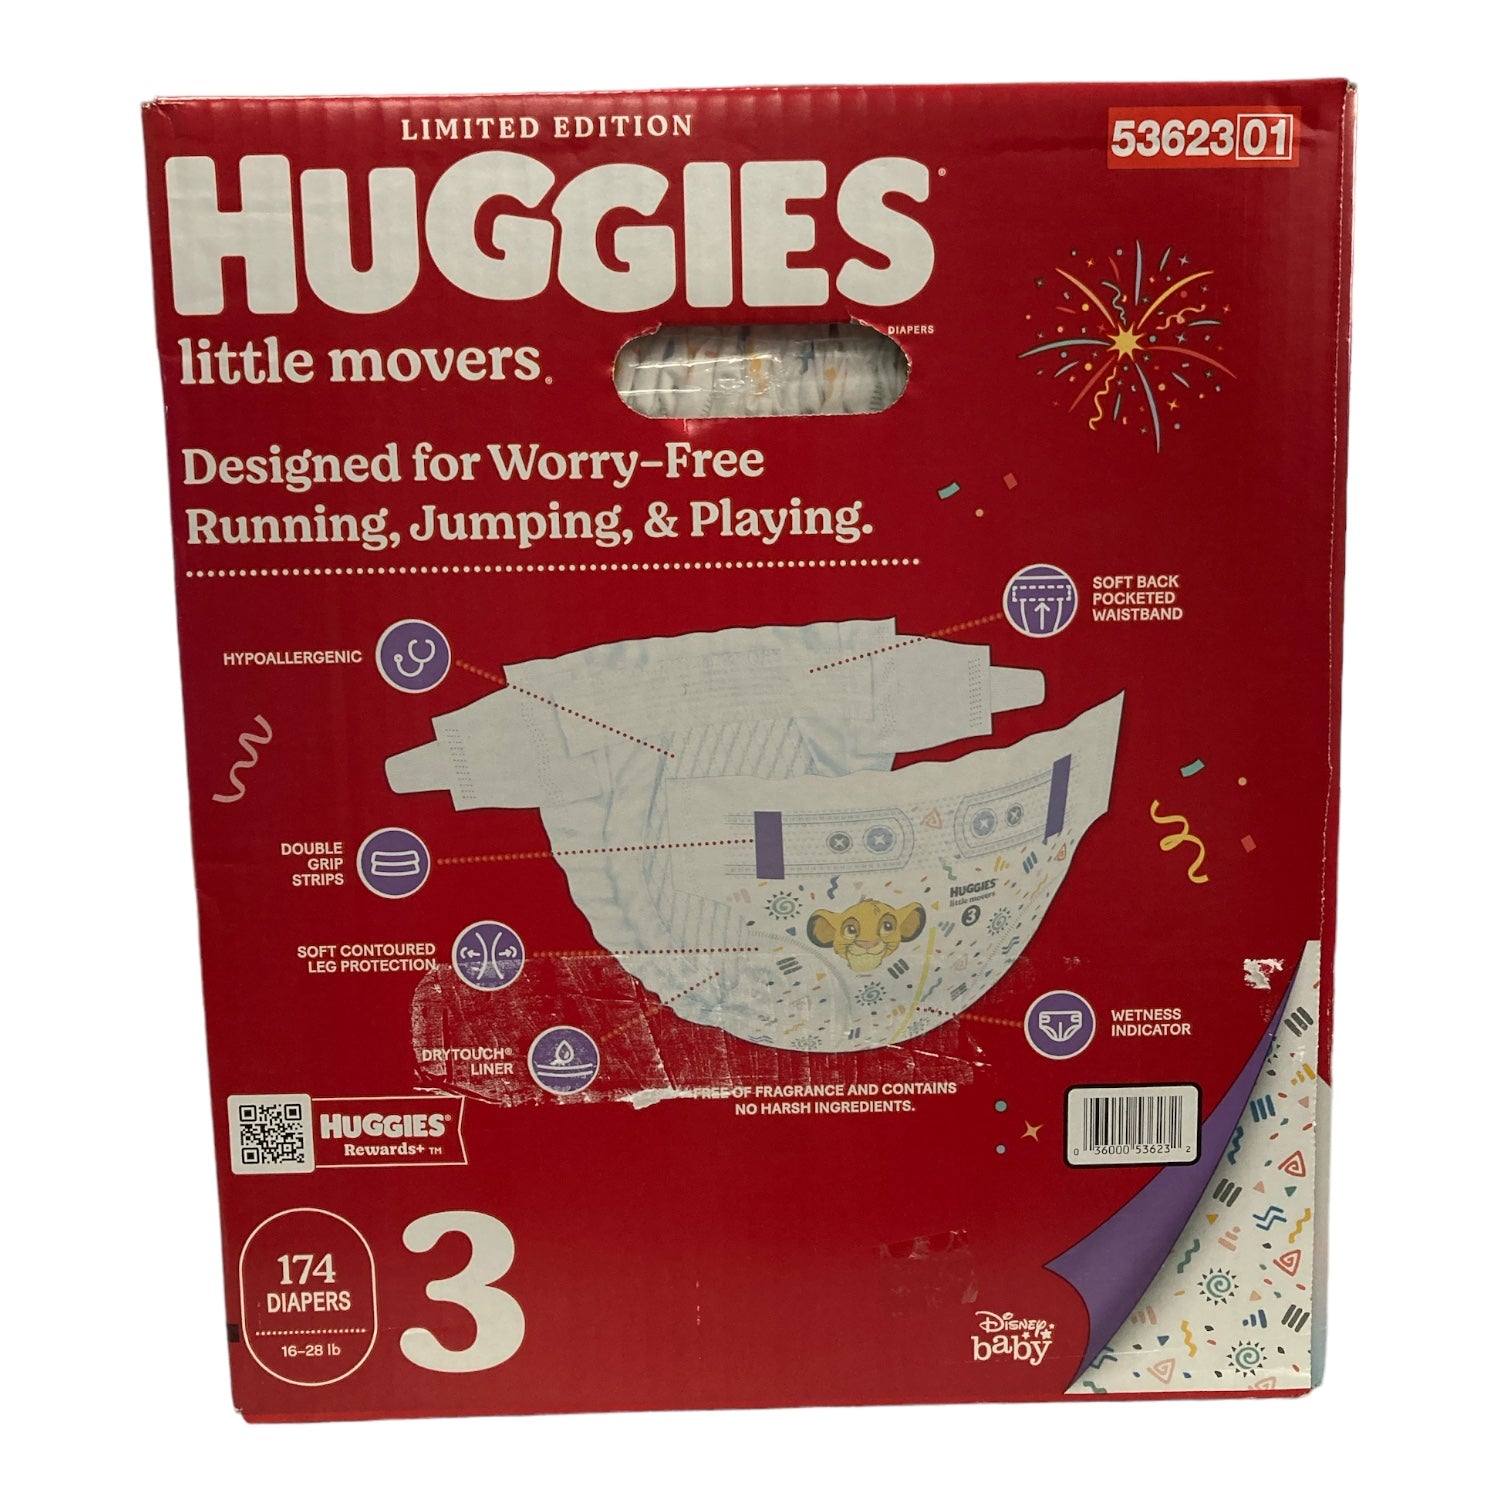 Huggies Little Movers Diapers Size 3 - 16-28 Pounds (174 Count)